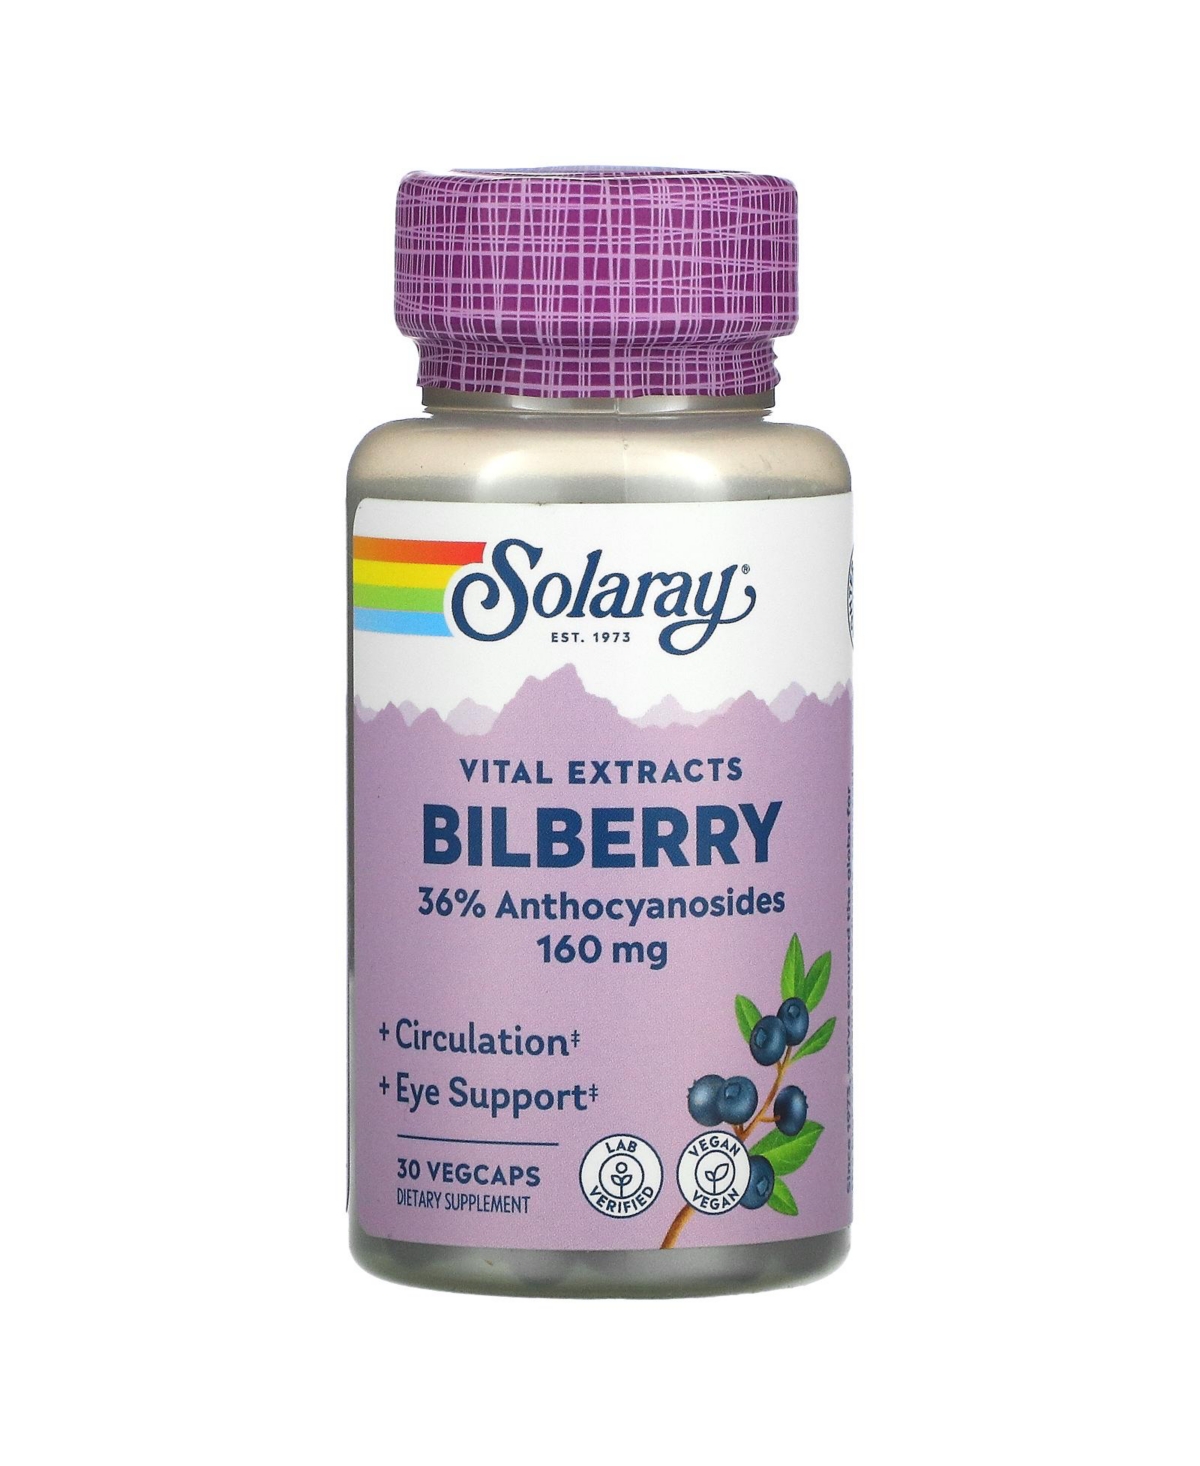 Vital Extracts Bilberry 160 mg - 30 Veg Caps - Assorted Pre-Pack